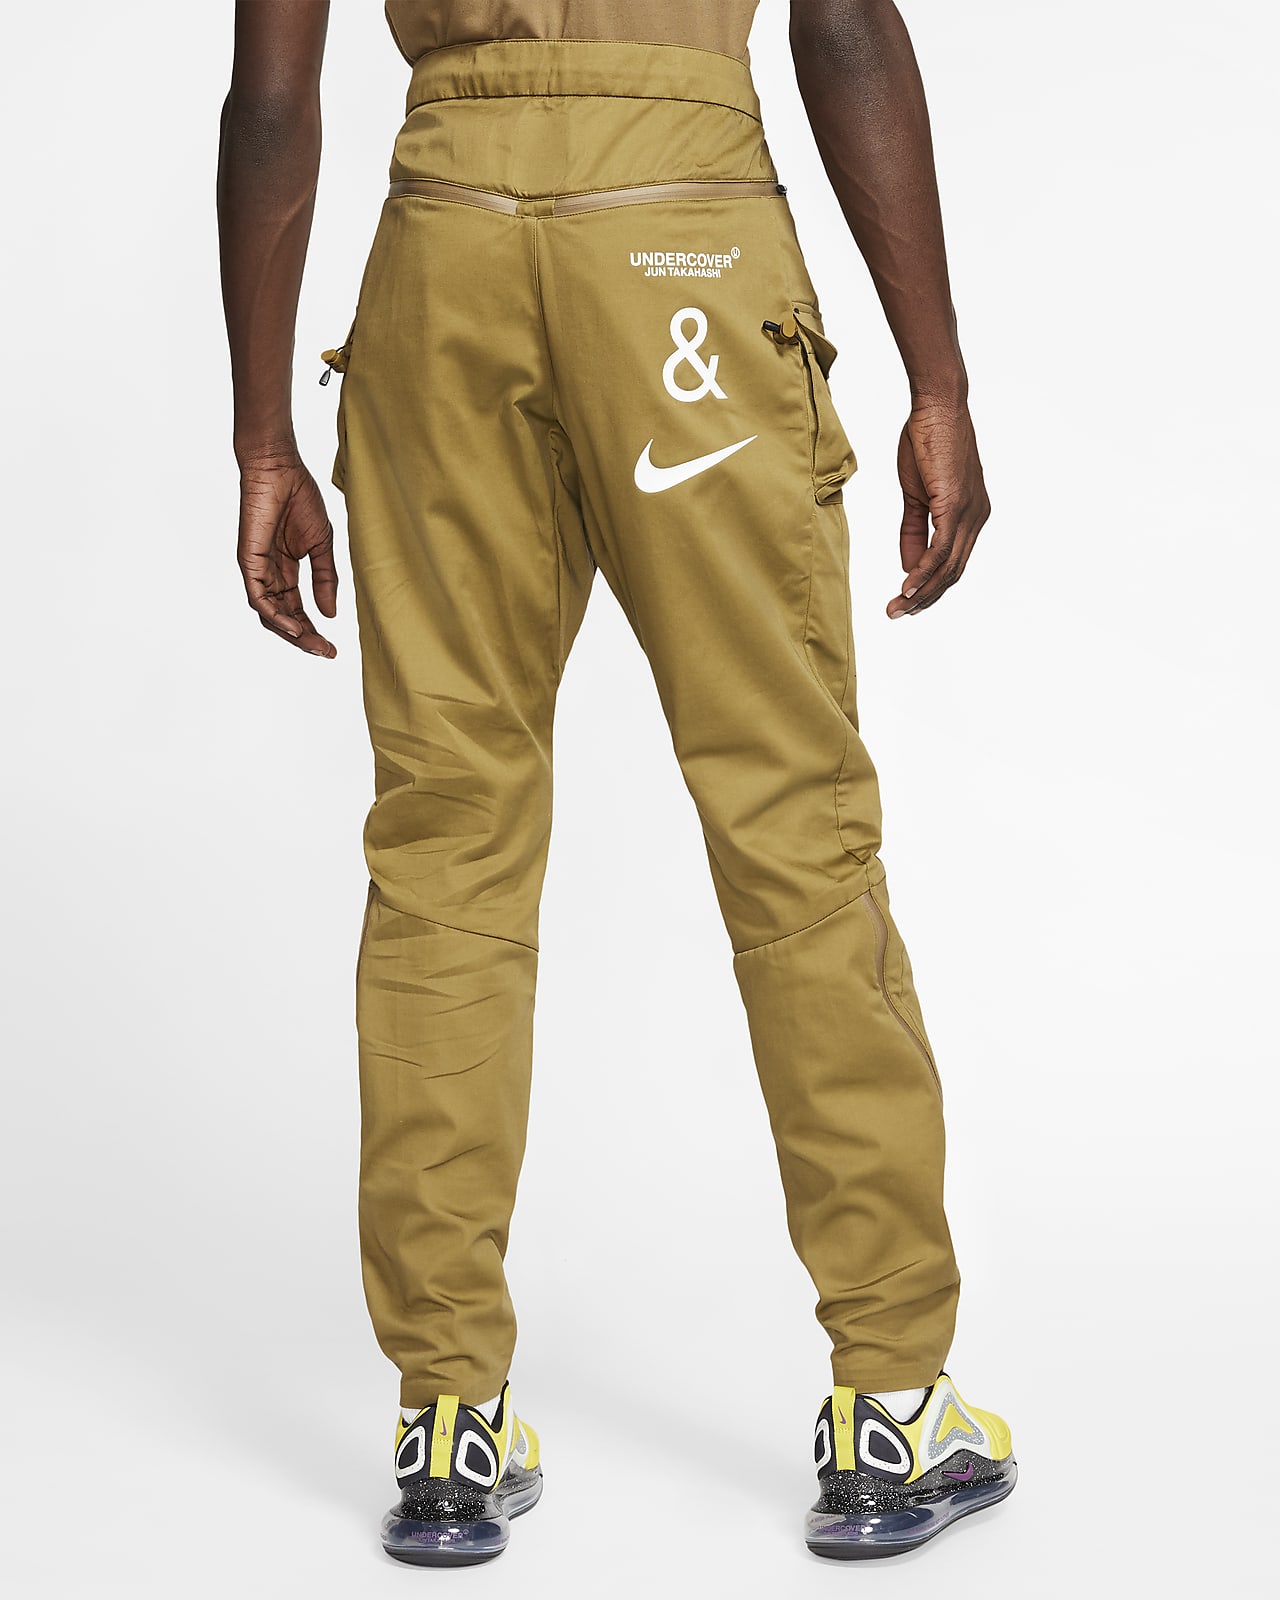 Nike x Undercover Cargo Trousers. Nike SG